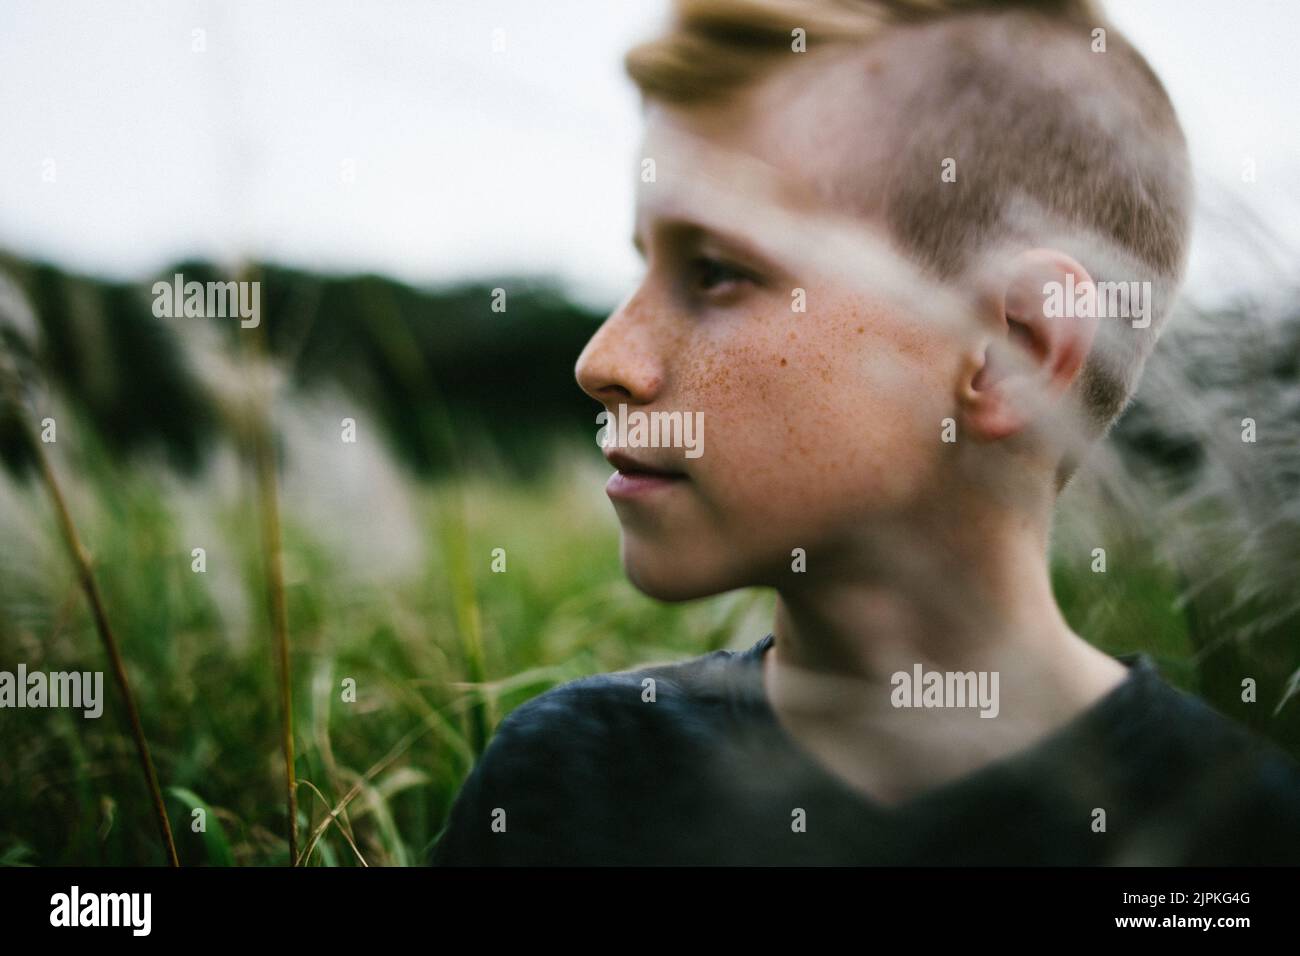 Pre teenage boy outside in nature in grass field Stock Photo